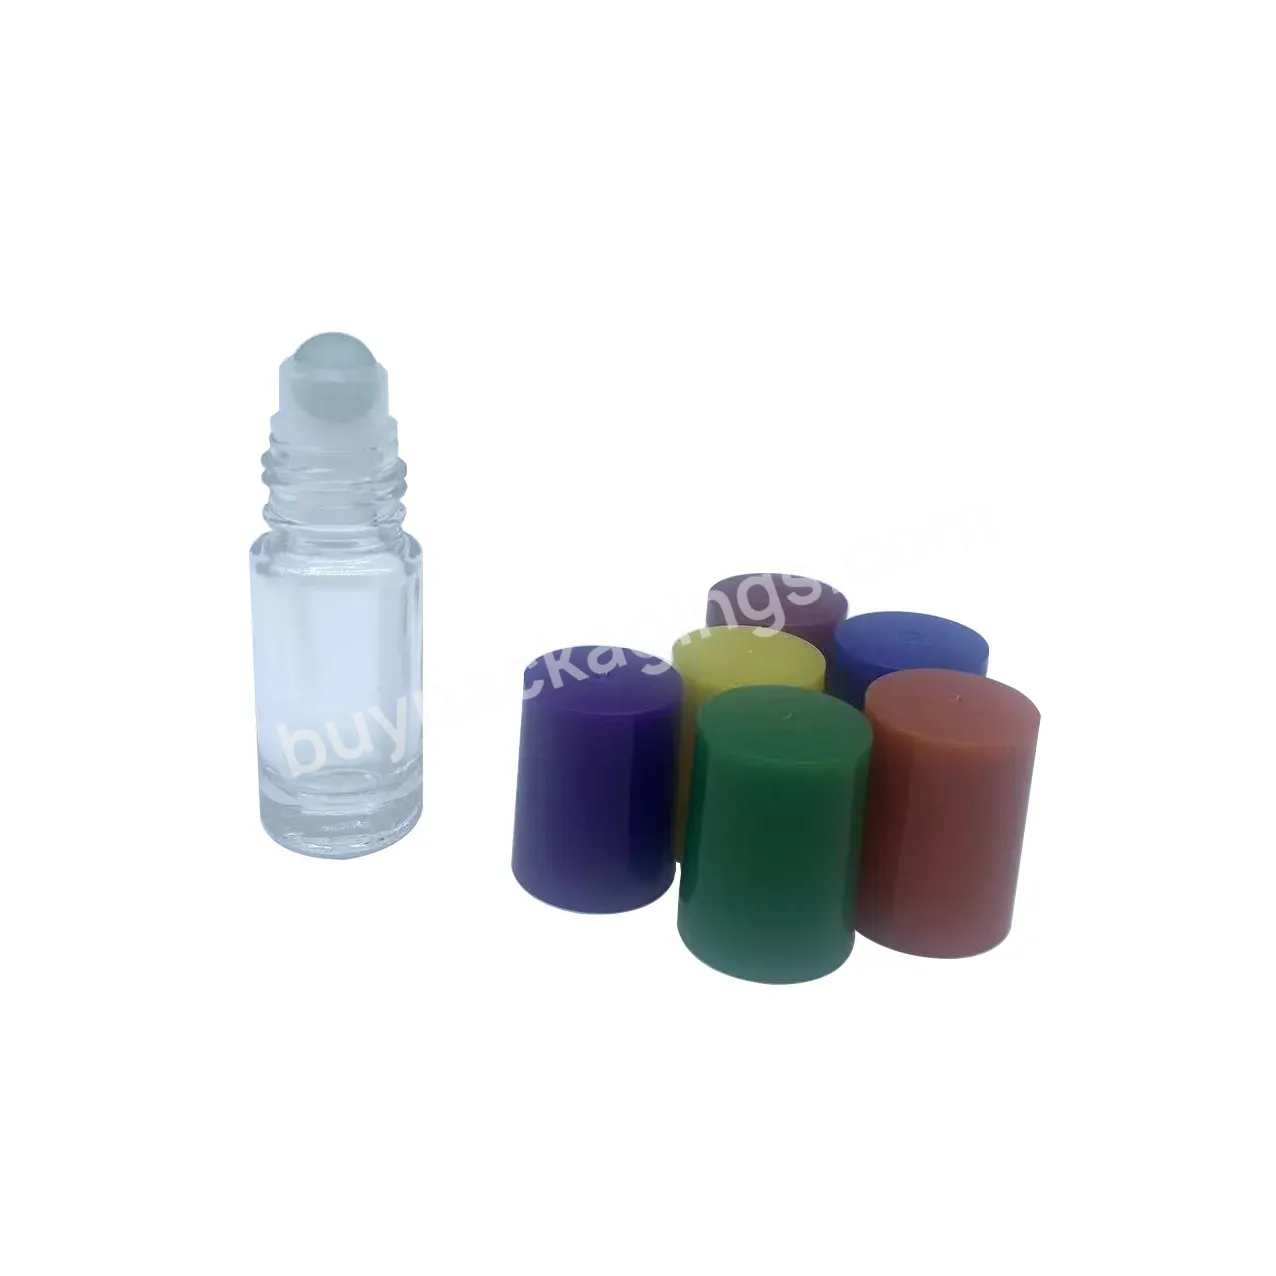 5ml 10ml Thick Bottom Clear Glass Lip Gloss Roller Bottle With Plastic Colorful Lid - Buy 5ml Glass Perfume Roller Bottle,Fragrance Oil Roller Bottles 10ml With Glass Roller Top,5ml Thick Glass Roller Bottle With Colorful Lid And Glass Roller.